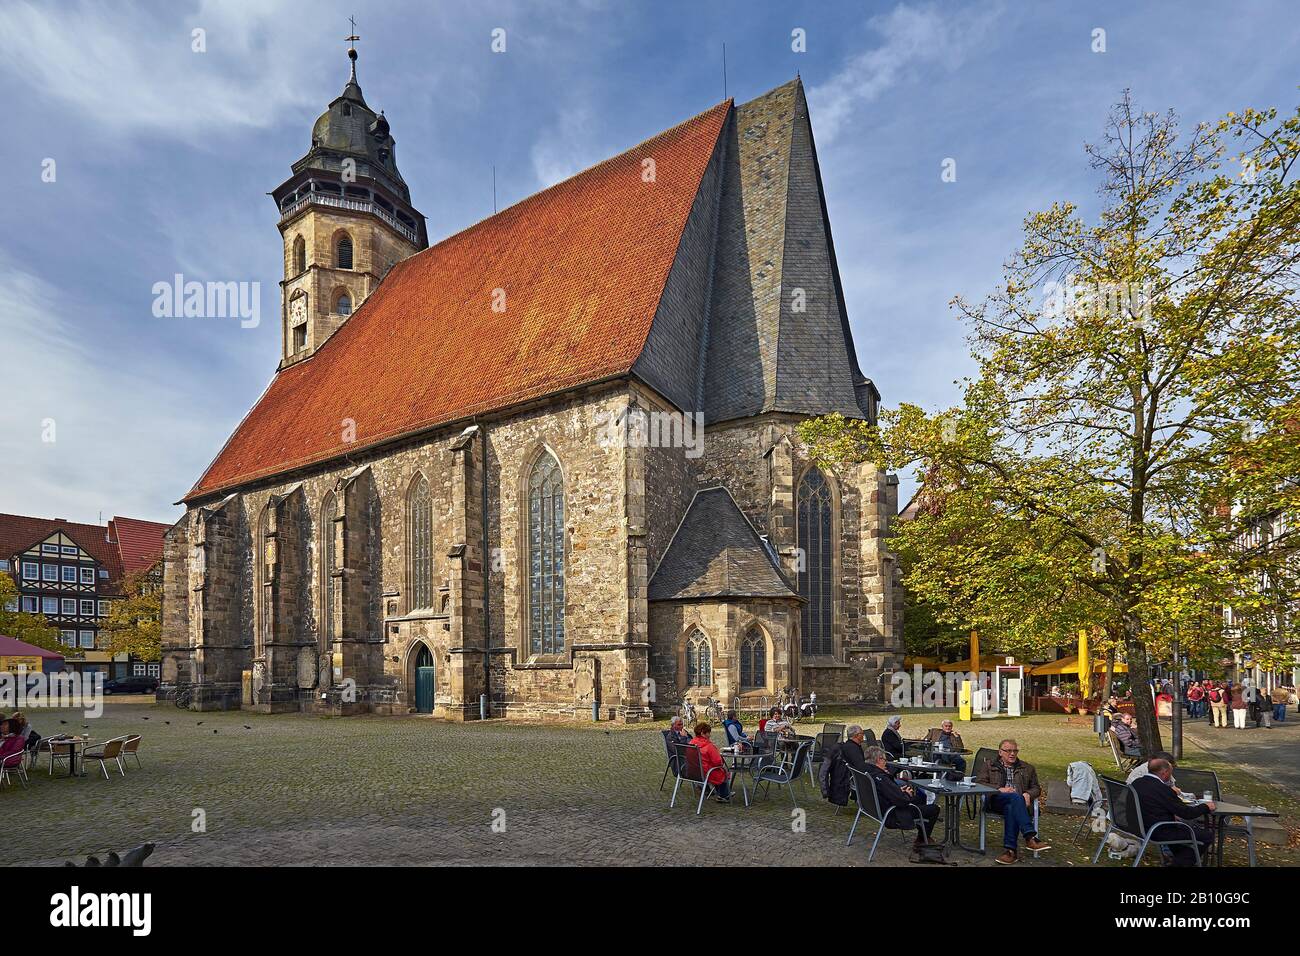 Blasiuskirche at the church square in the old town, Hann. Münden, Lower Saxony, Germany Stock Photo